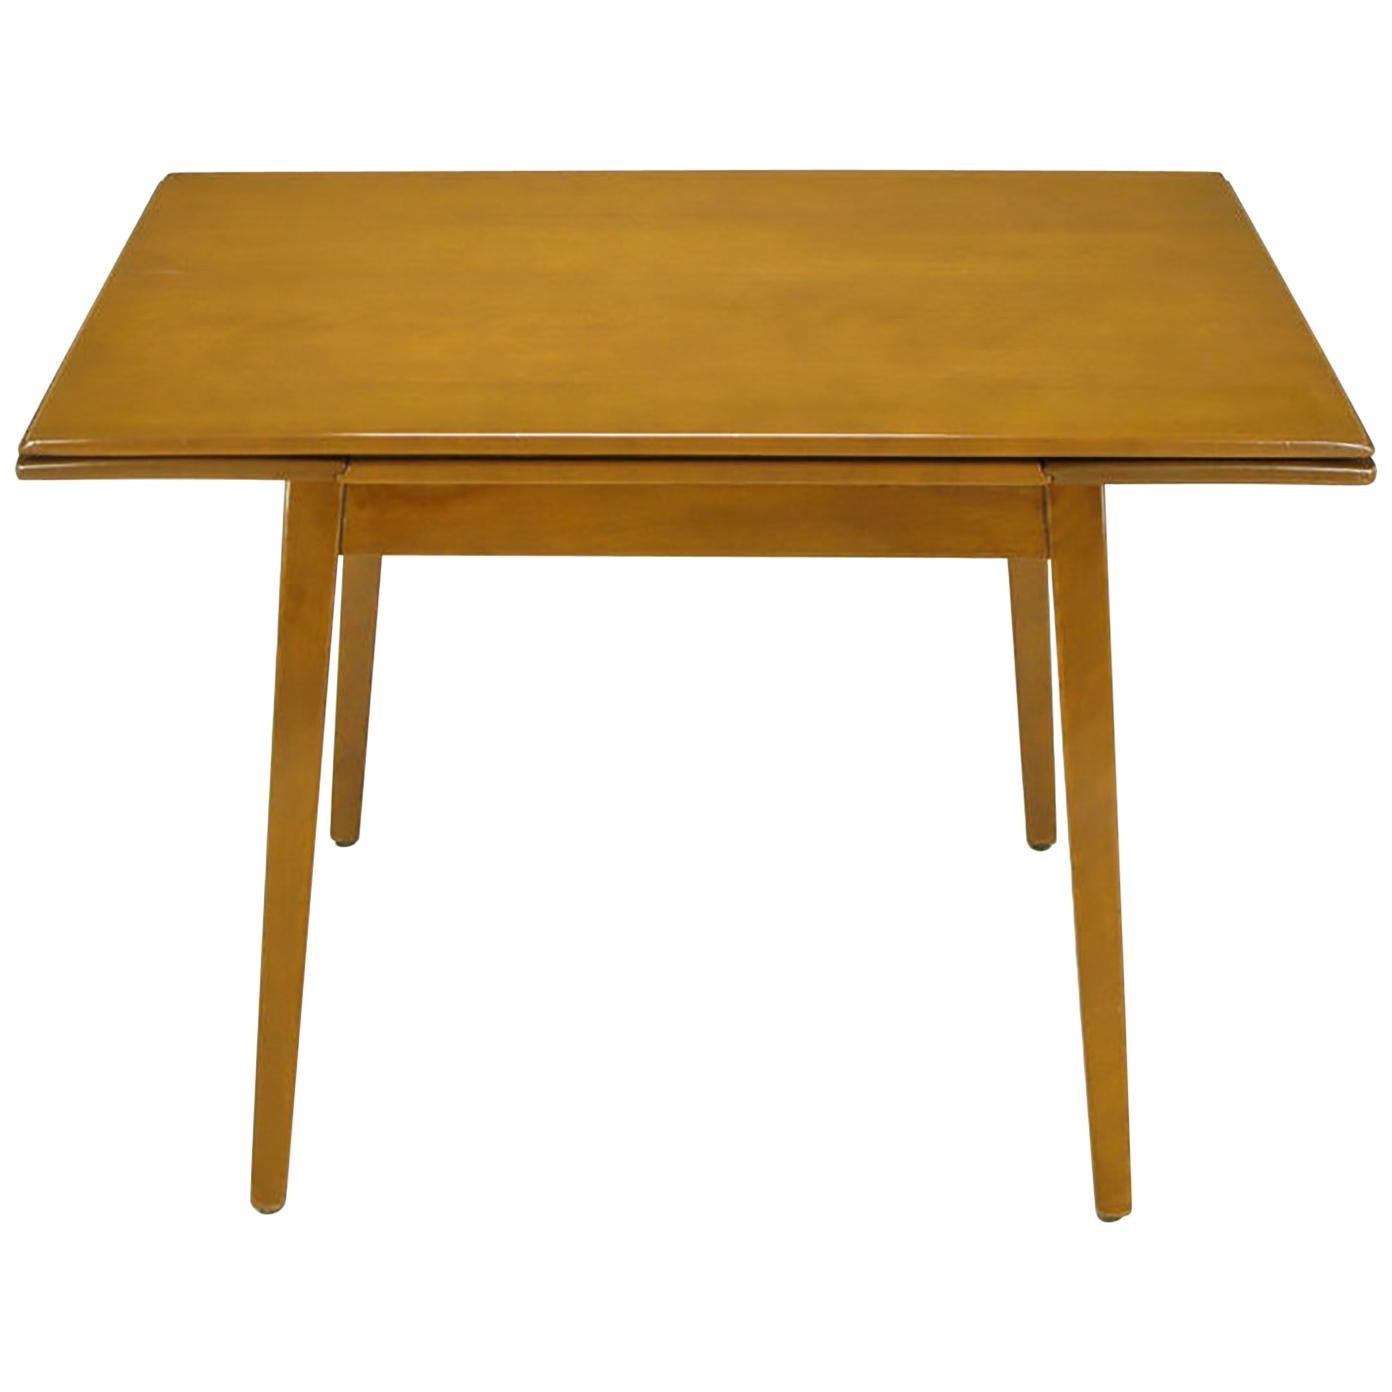 Jan Kuypers Birch Draw-Leaf Dining Table by Imperial of Canada